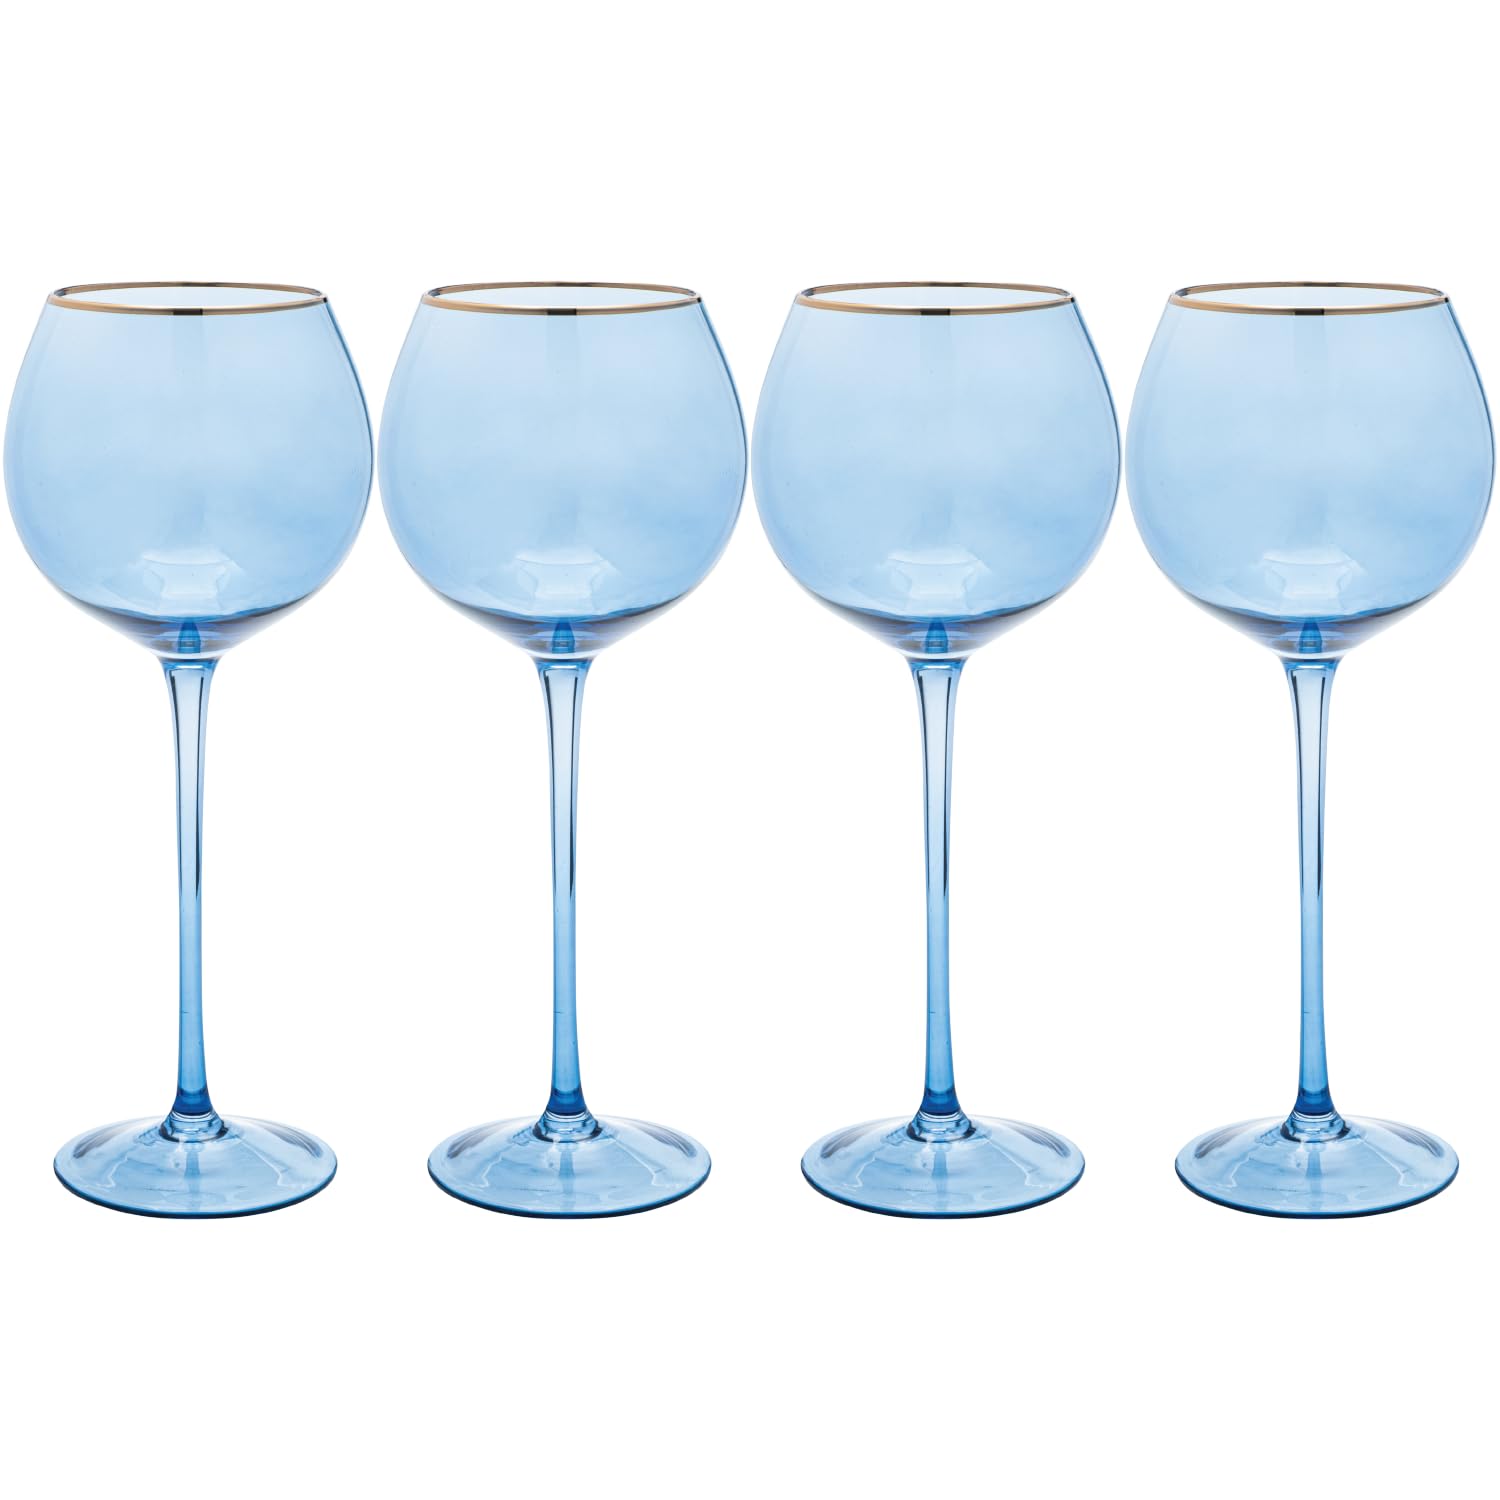 Vikko Wine Glasses, 17 Ounce Blue Wine Glass with Gold Rim, Set of 4 Stemmed Wine Glasses for Red and White Wine, Colored Wine Glasses, Glasses for Wine